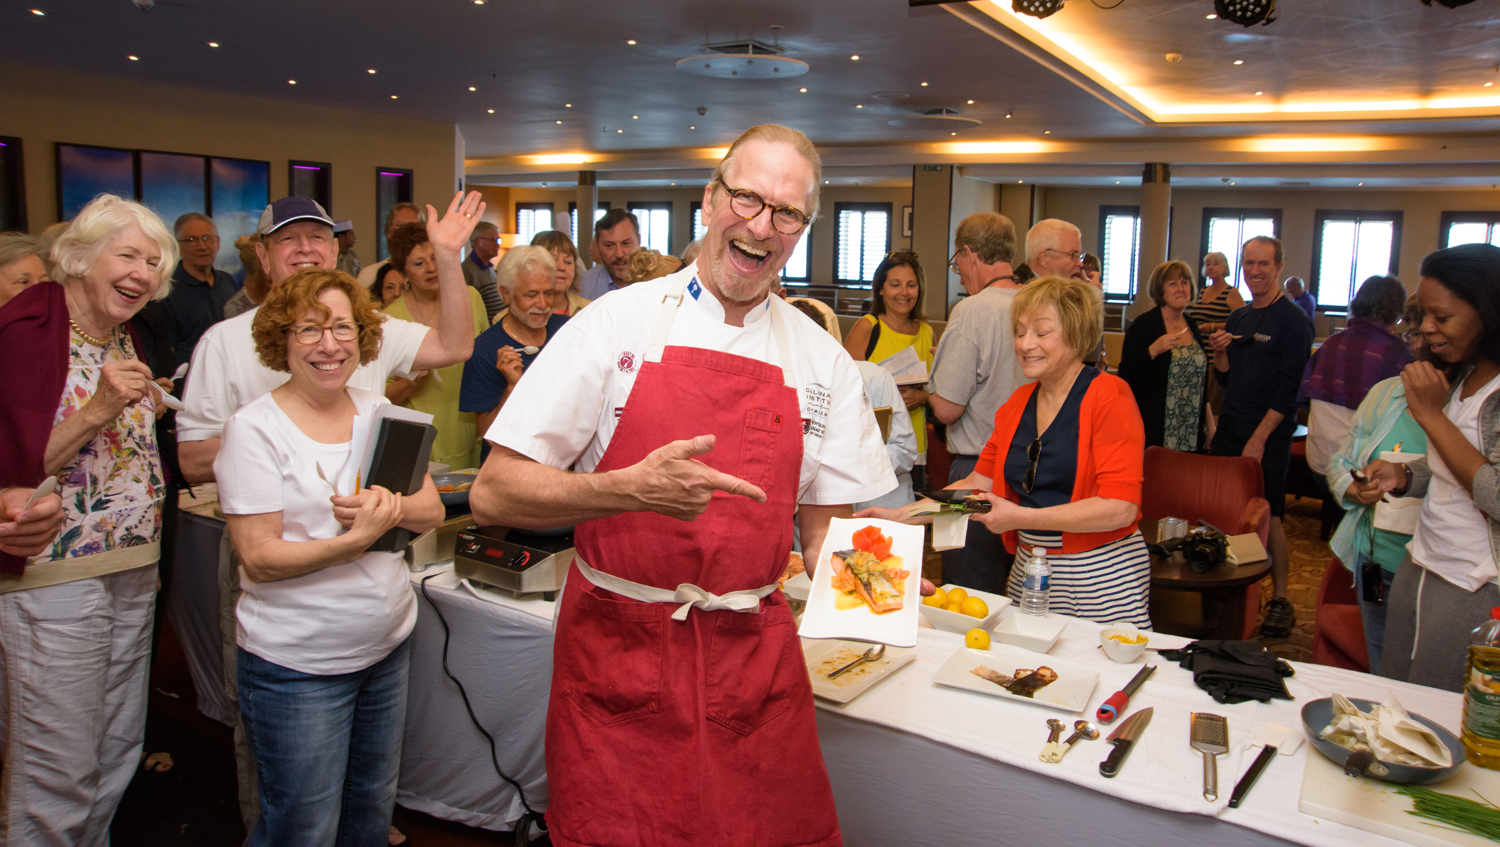 Unique James Beard Foundation programming will be available on Windstar sailings, including interactive culinary demonstrations by Windstar chefs.